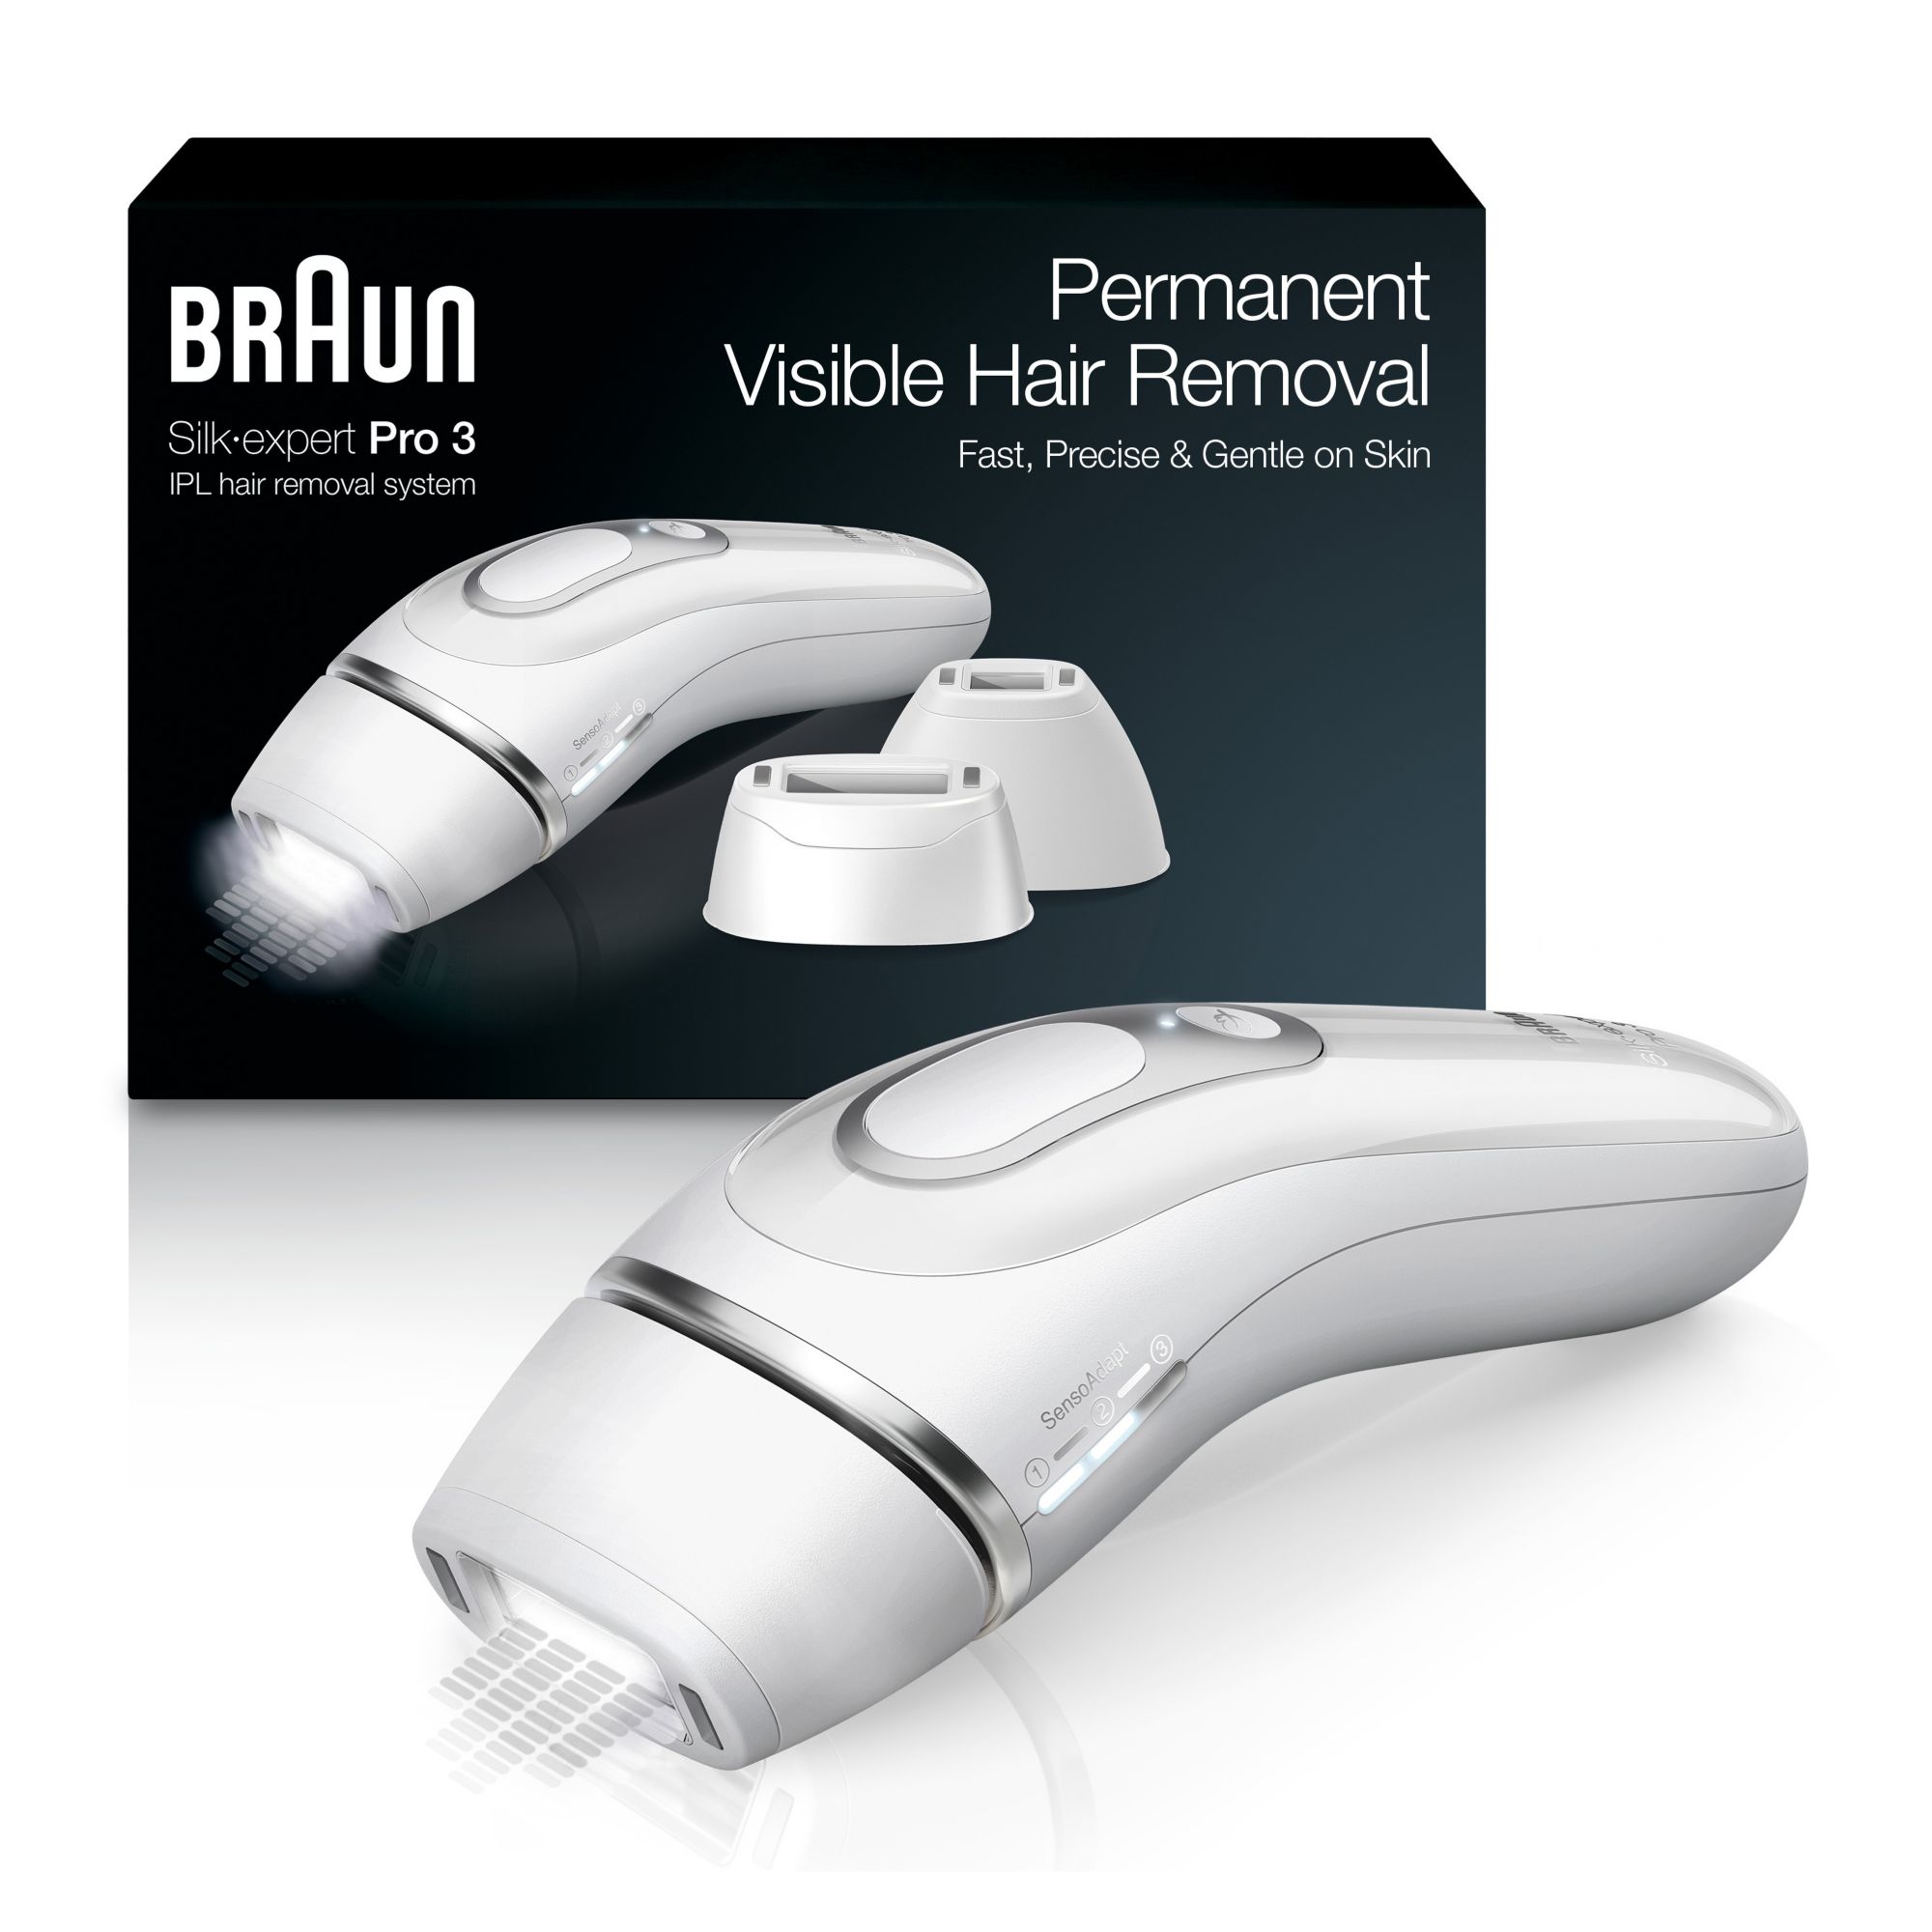 Hair Braun BJ\'s Men Expert & Silk Removal At-Home System Wholesale IPL Pro Club Women for 3 |